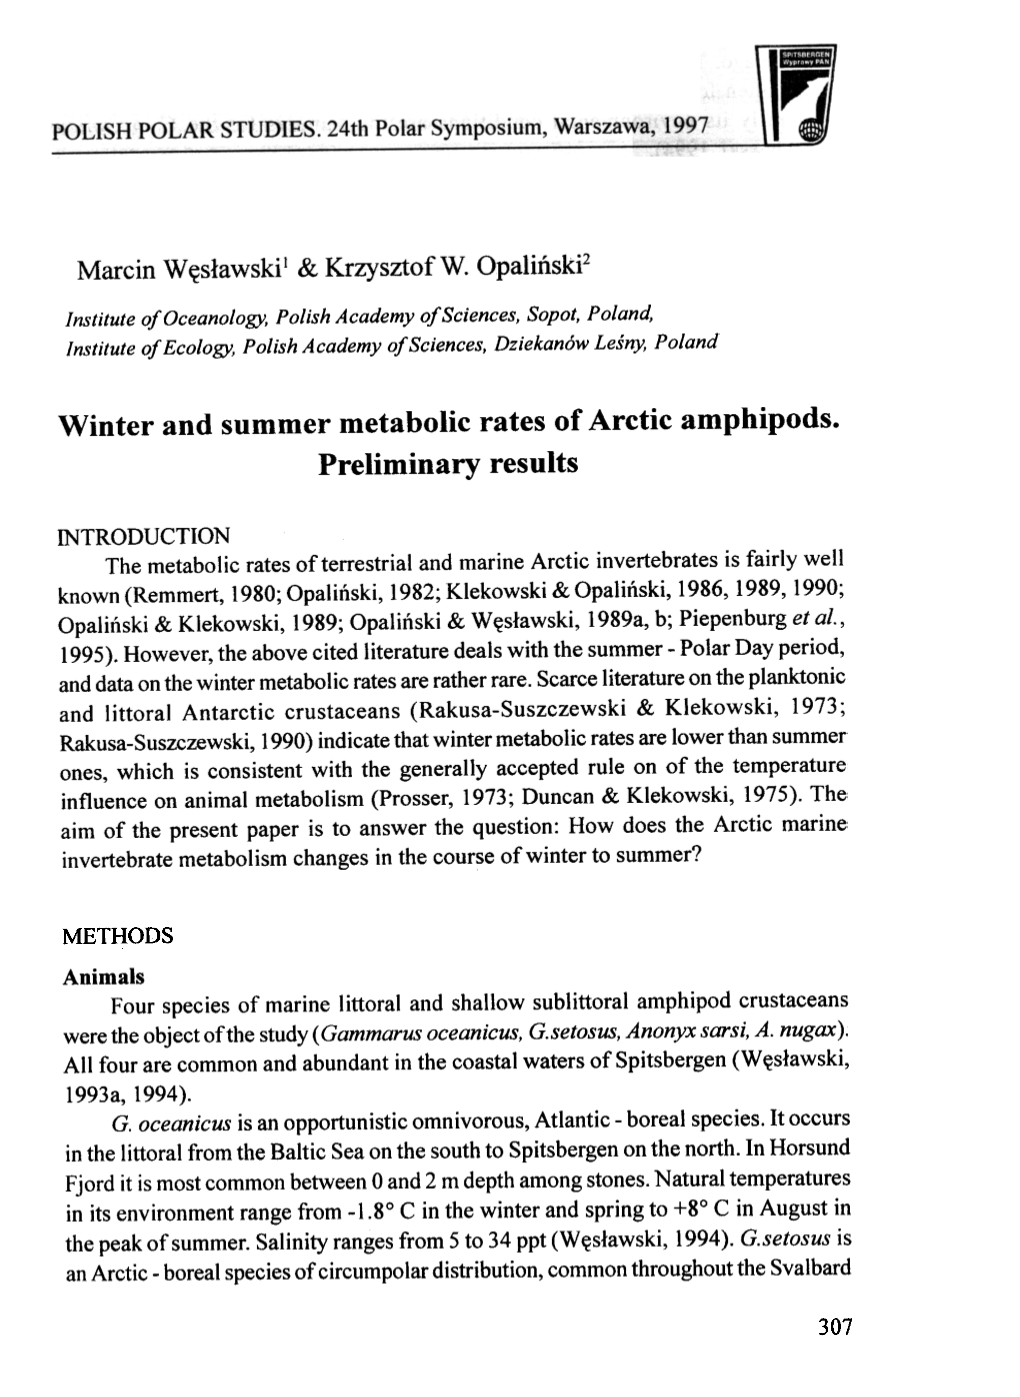 Winter and Summer Metabolic Rates of Arctic Amphipods. Preliminary Results METHODS